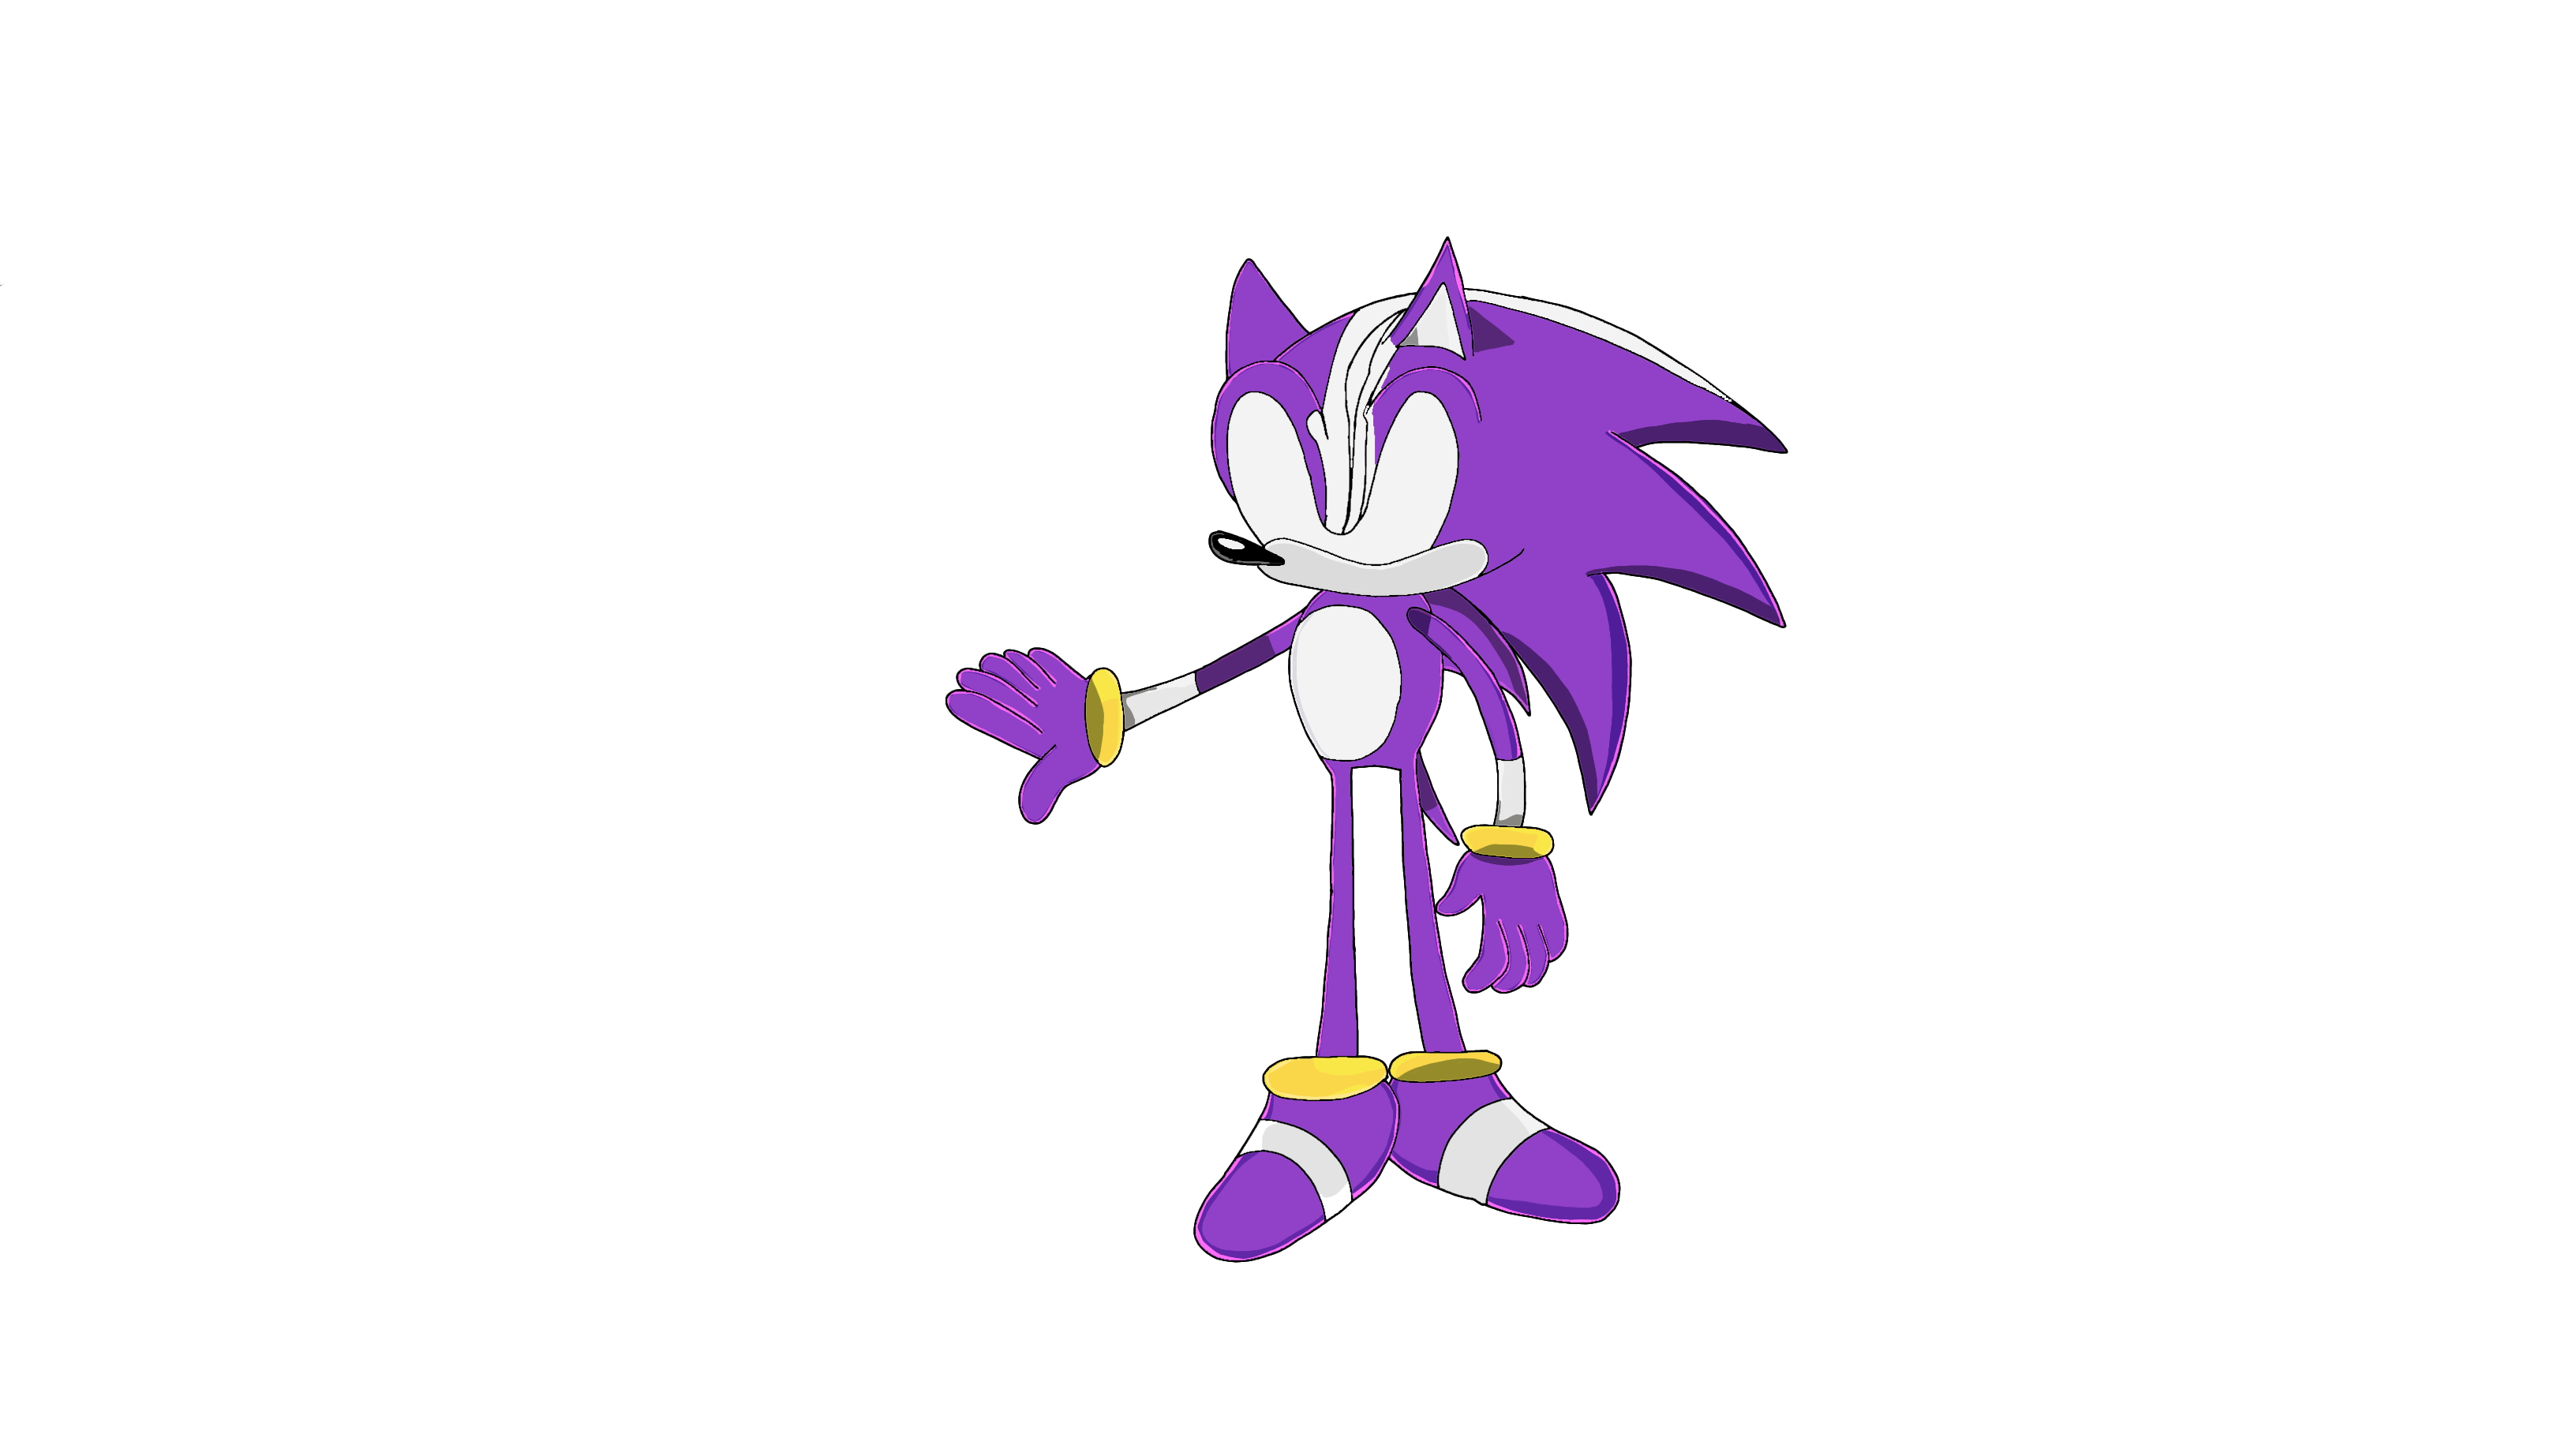 Drawing Sonic - (DarkSpine Sonic Super-Form Style!) 